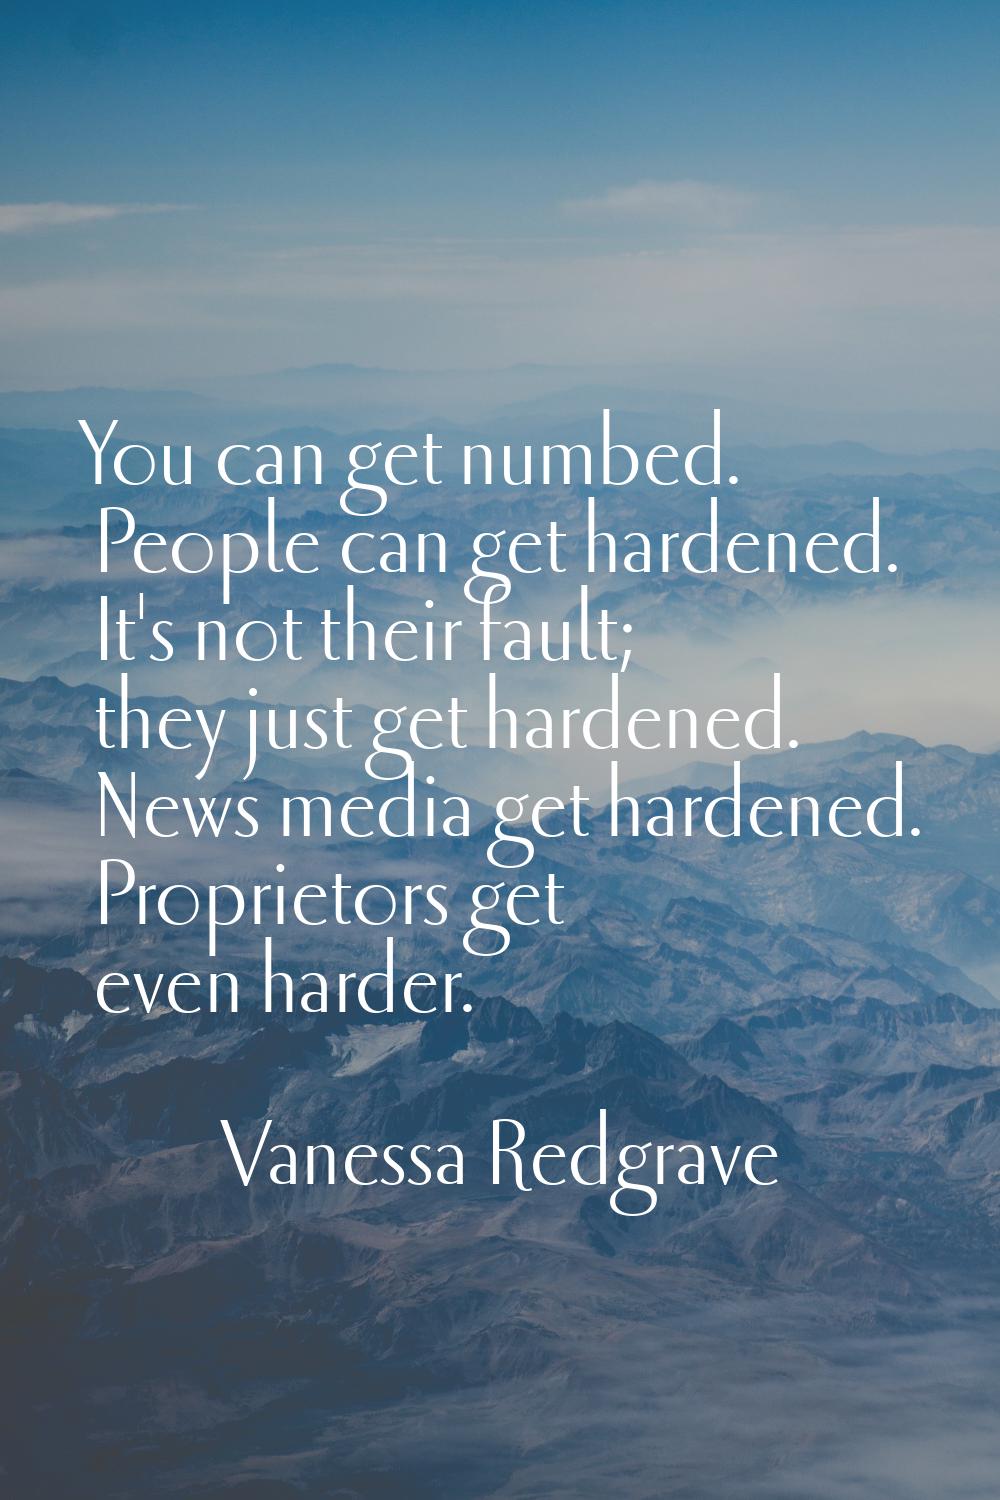 You can get numbed. People can get hardened. It's not their fault; they just get hardened. News med